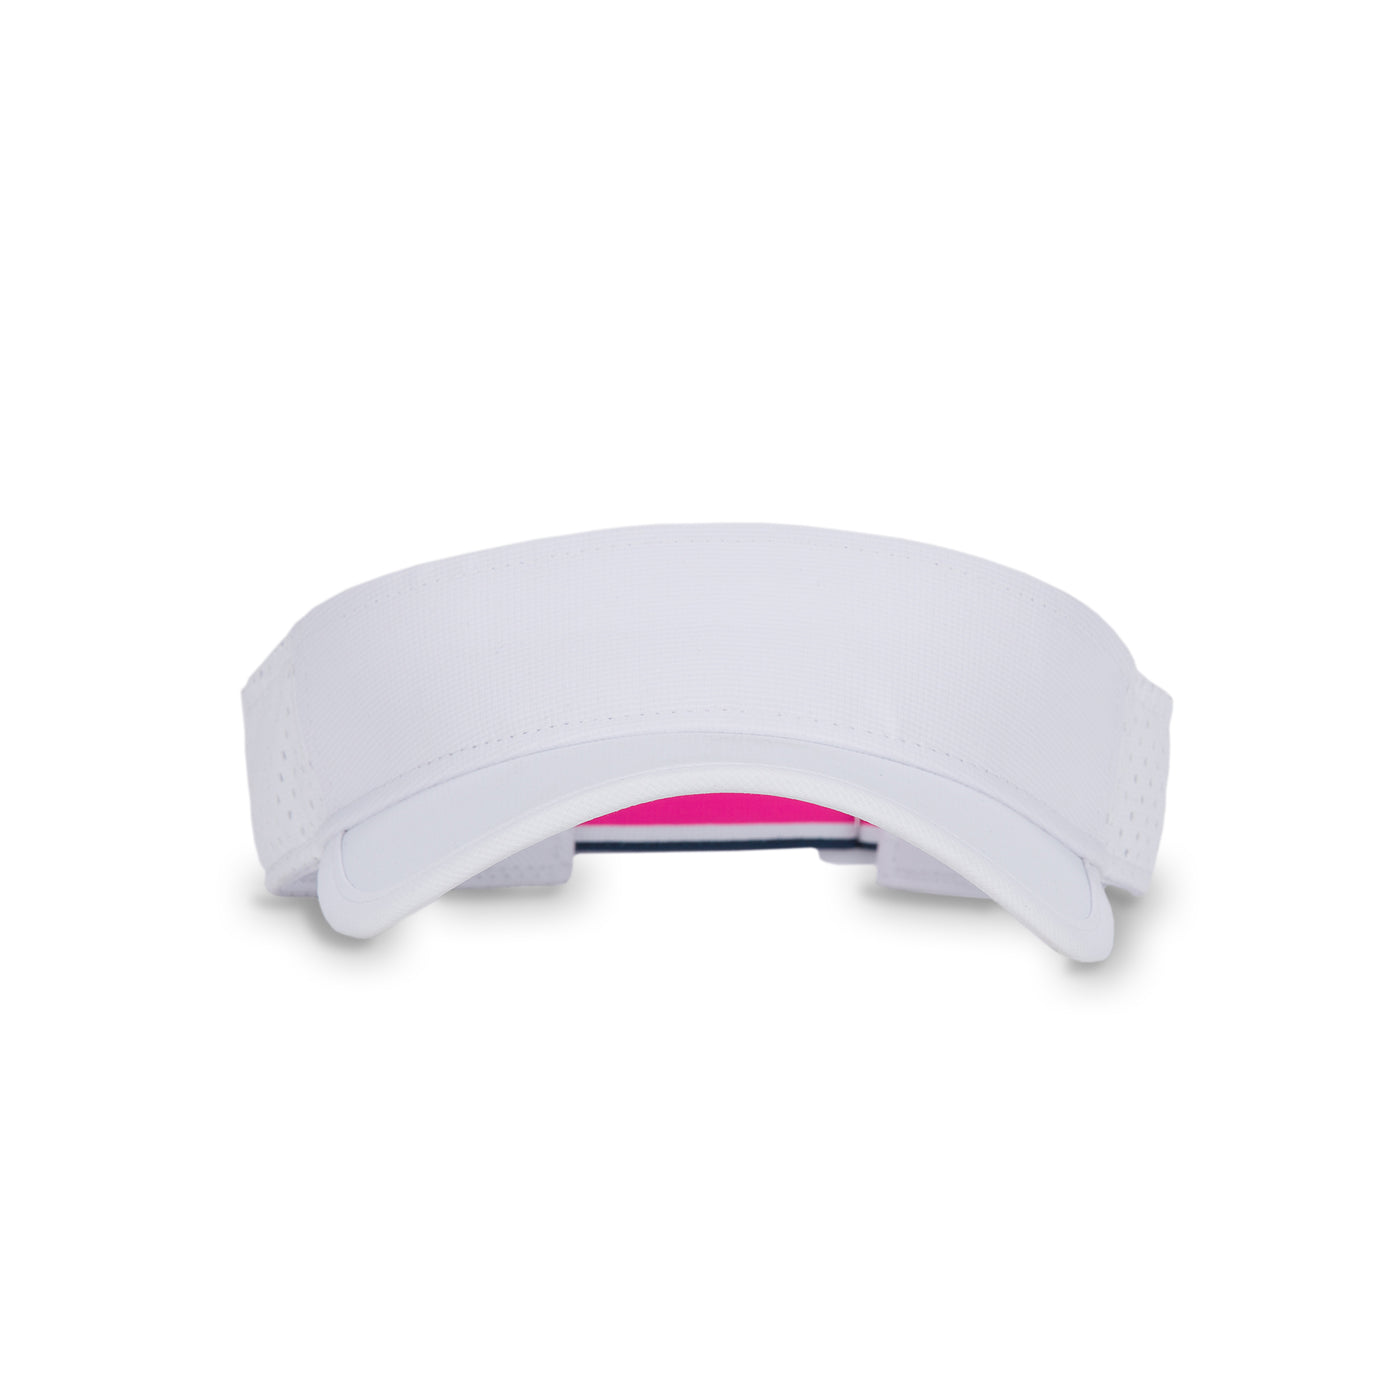 Front view of white visor with pink and navy striped adjustable strap on the back.